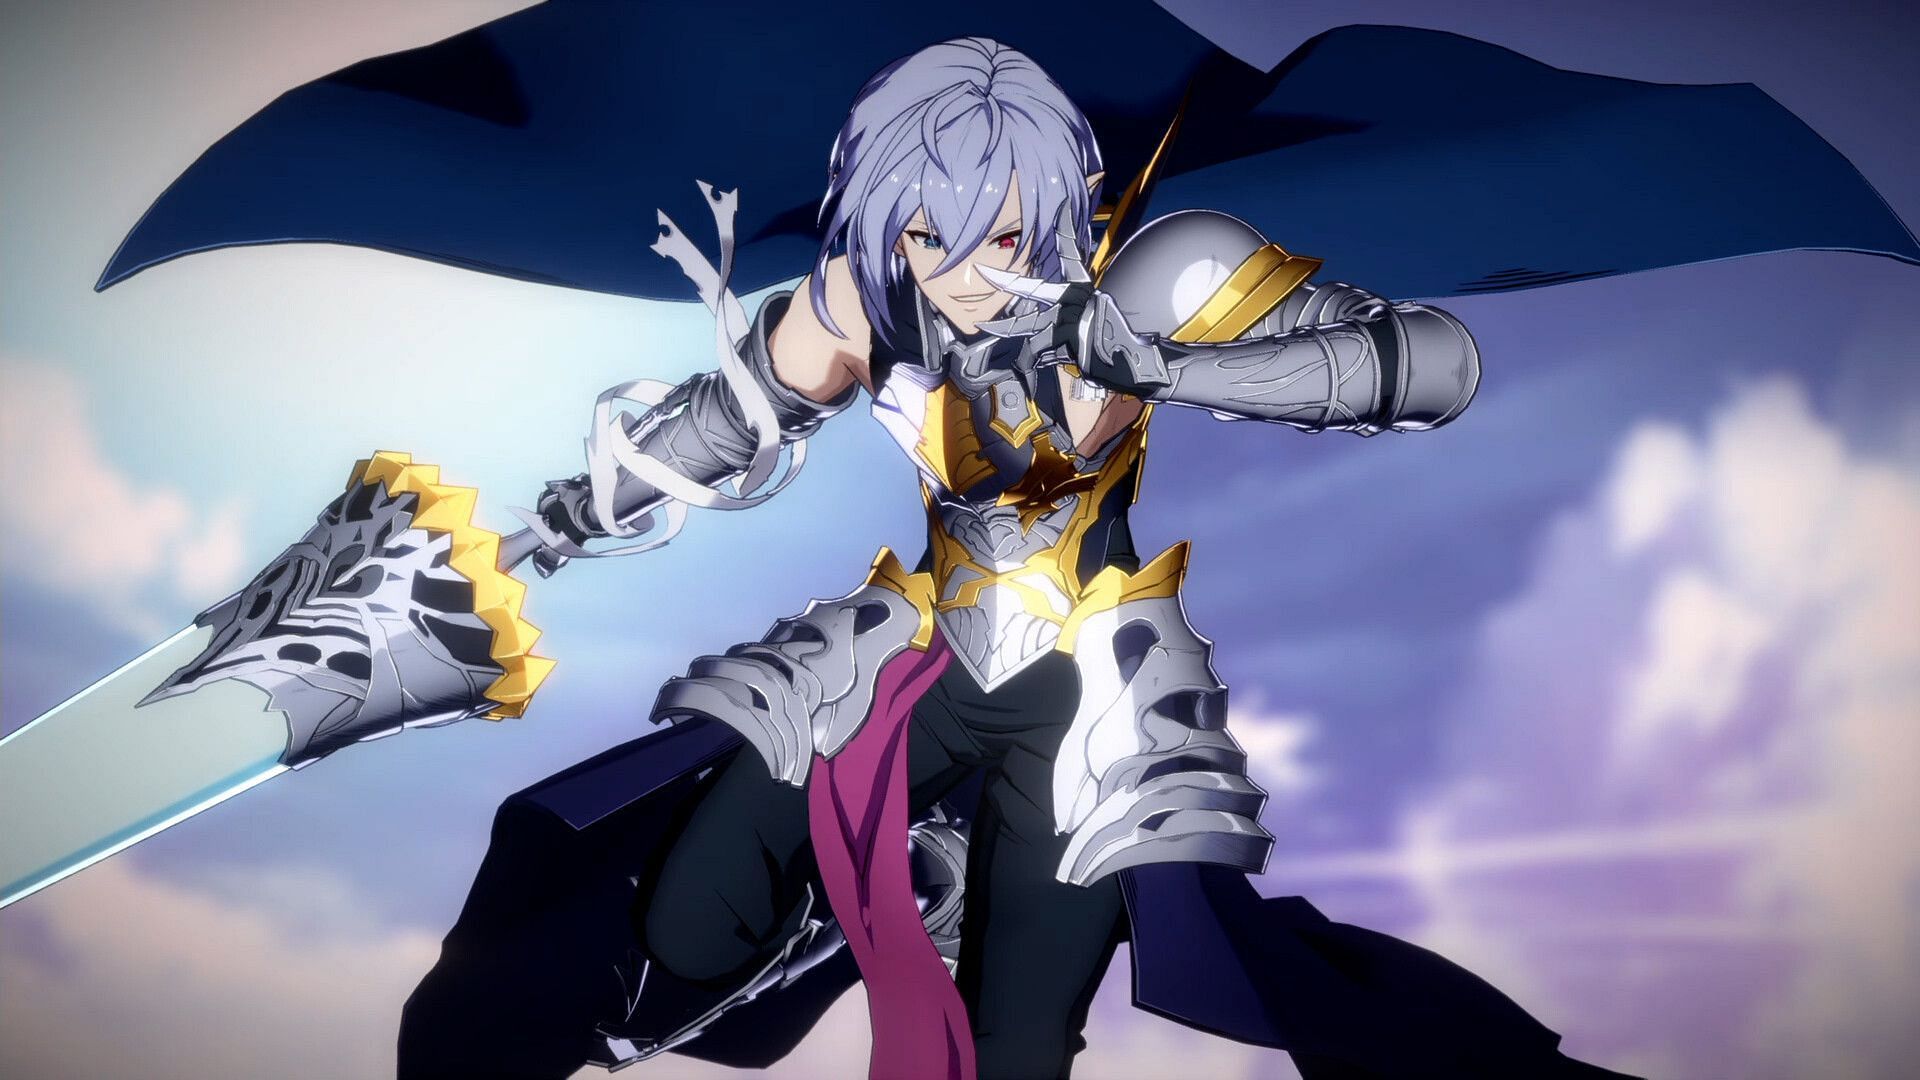 Granblue Fantasy Versus review: a great first fighting game - The